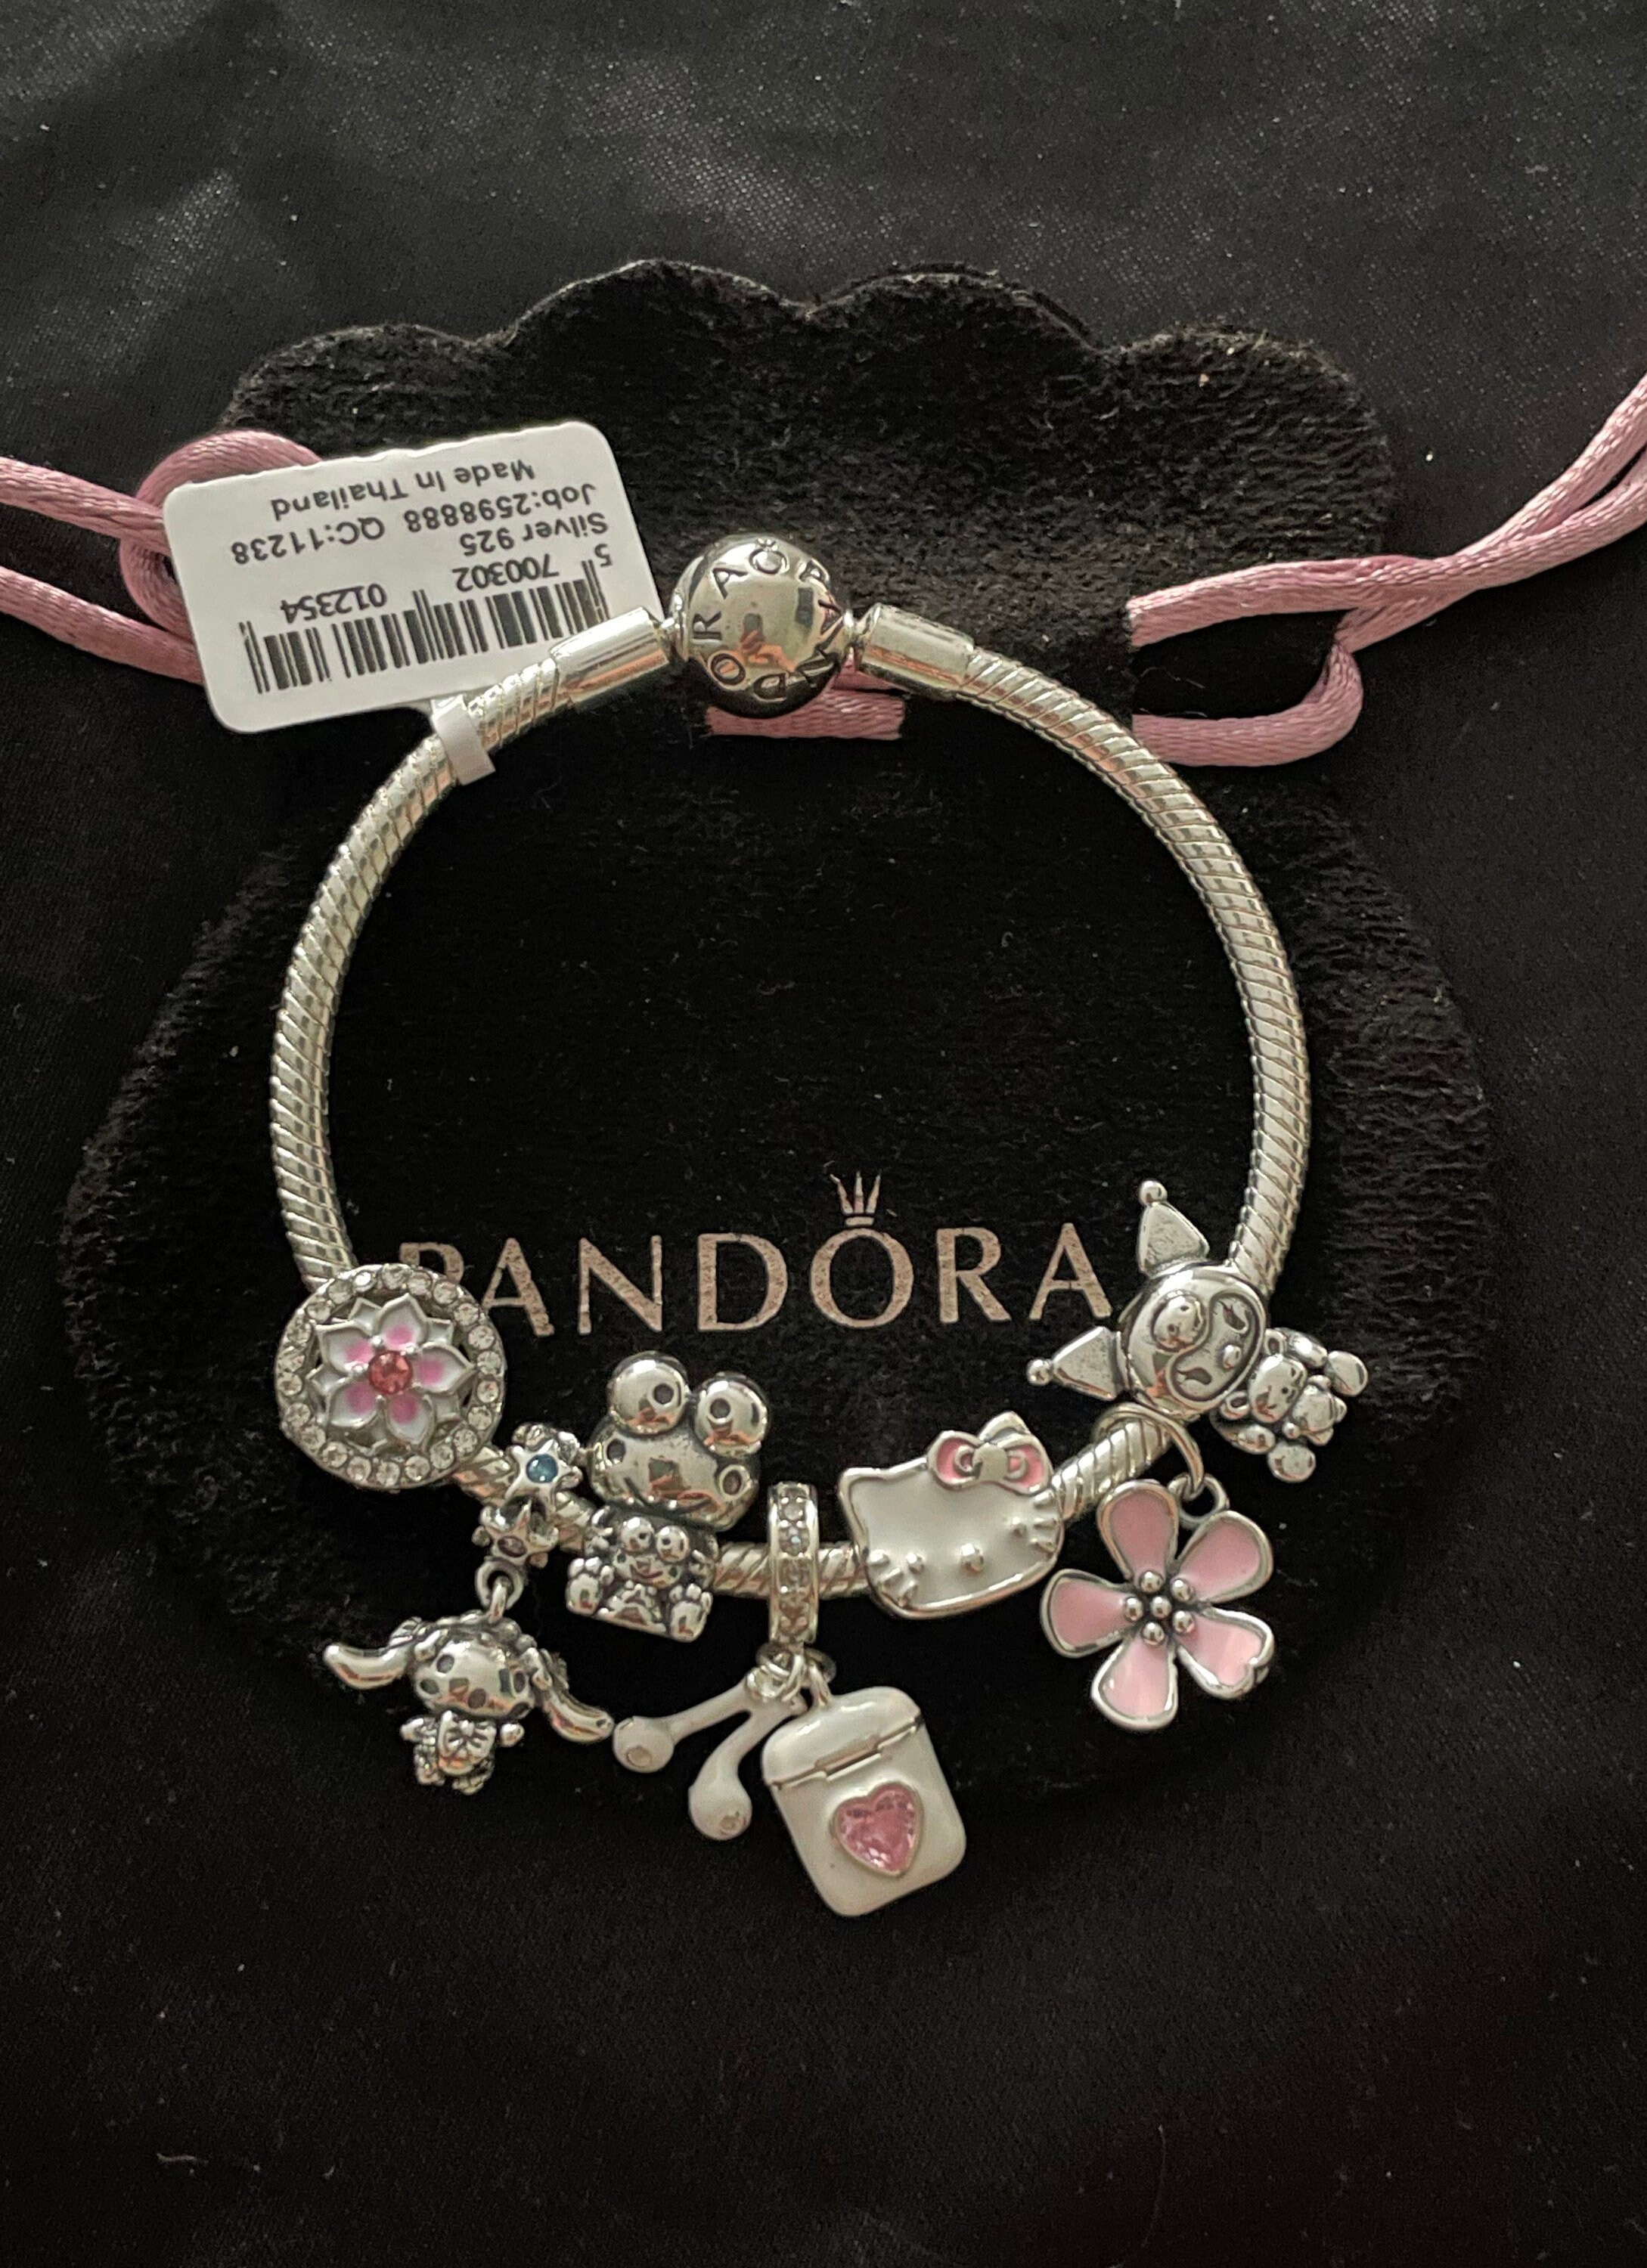  Pandora Moments Snake Chain Bracelet - Compatible Moments Charms  - Rose Gold Charm Bracelet for Women - Features Rose - Gift for Her - 6.3:  Clothing, Shoes & Jewelry